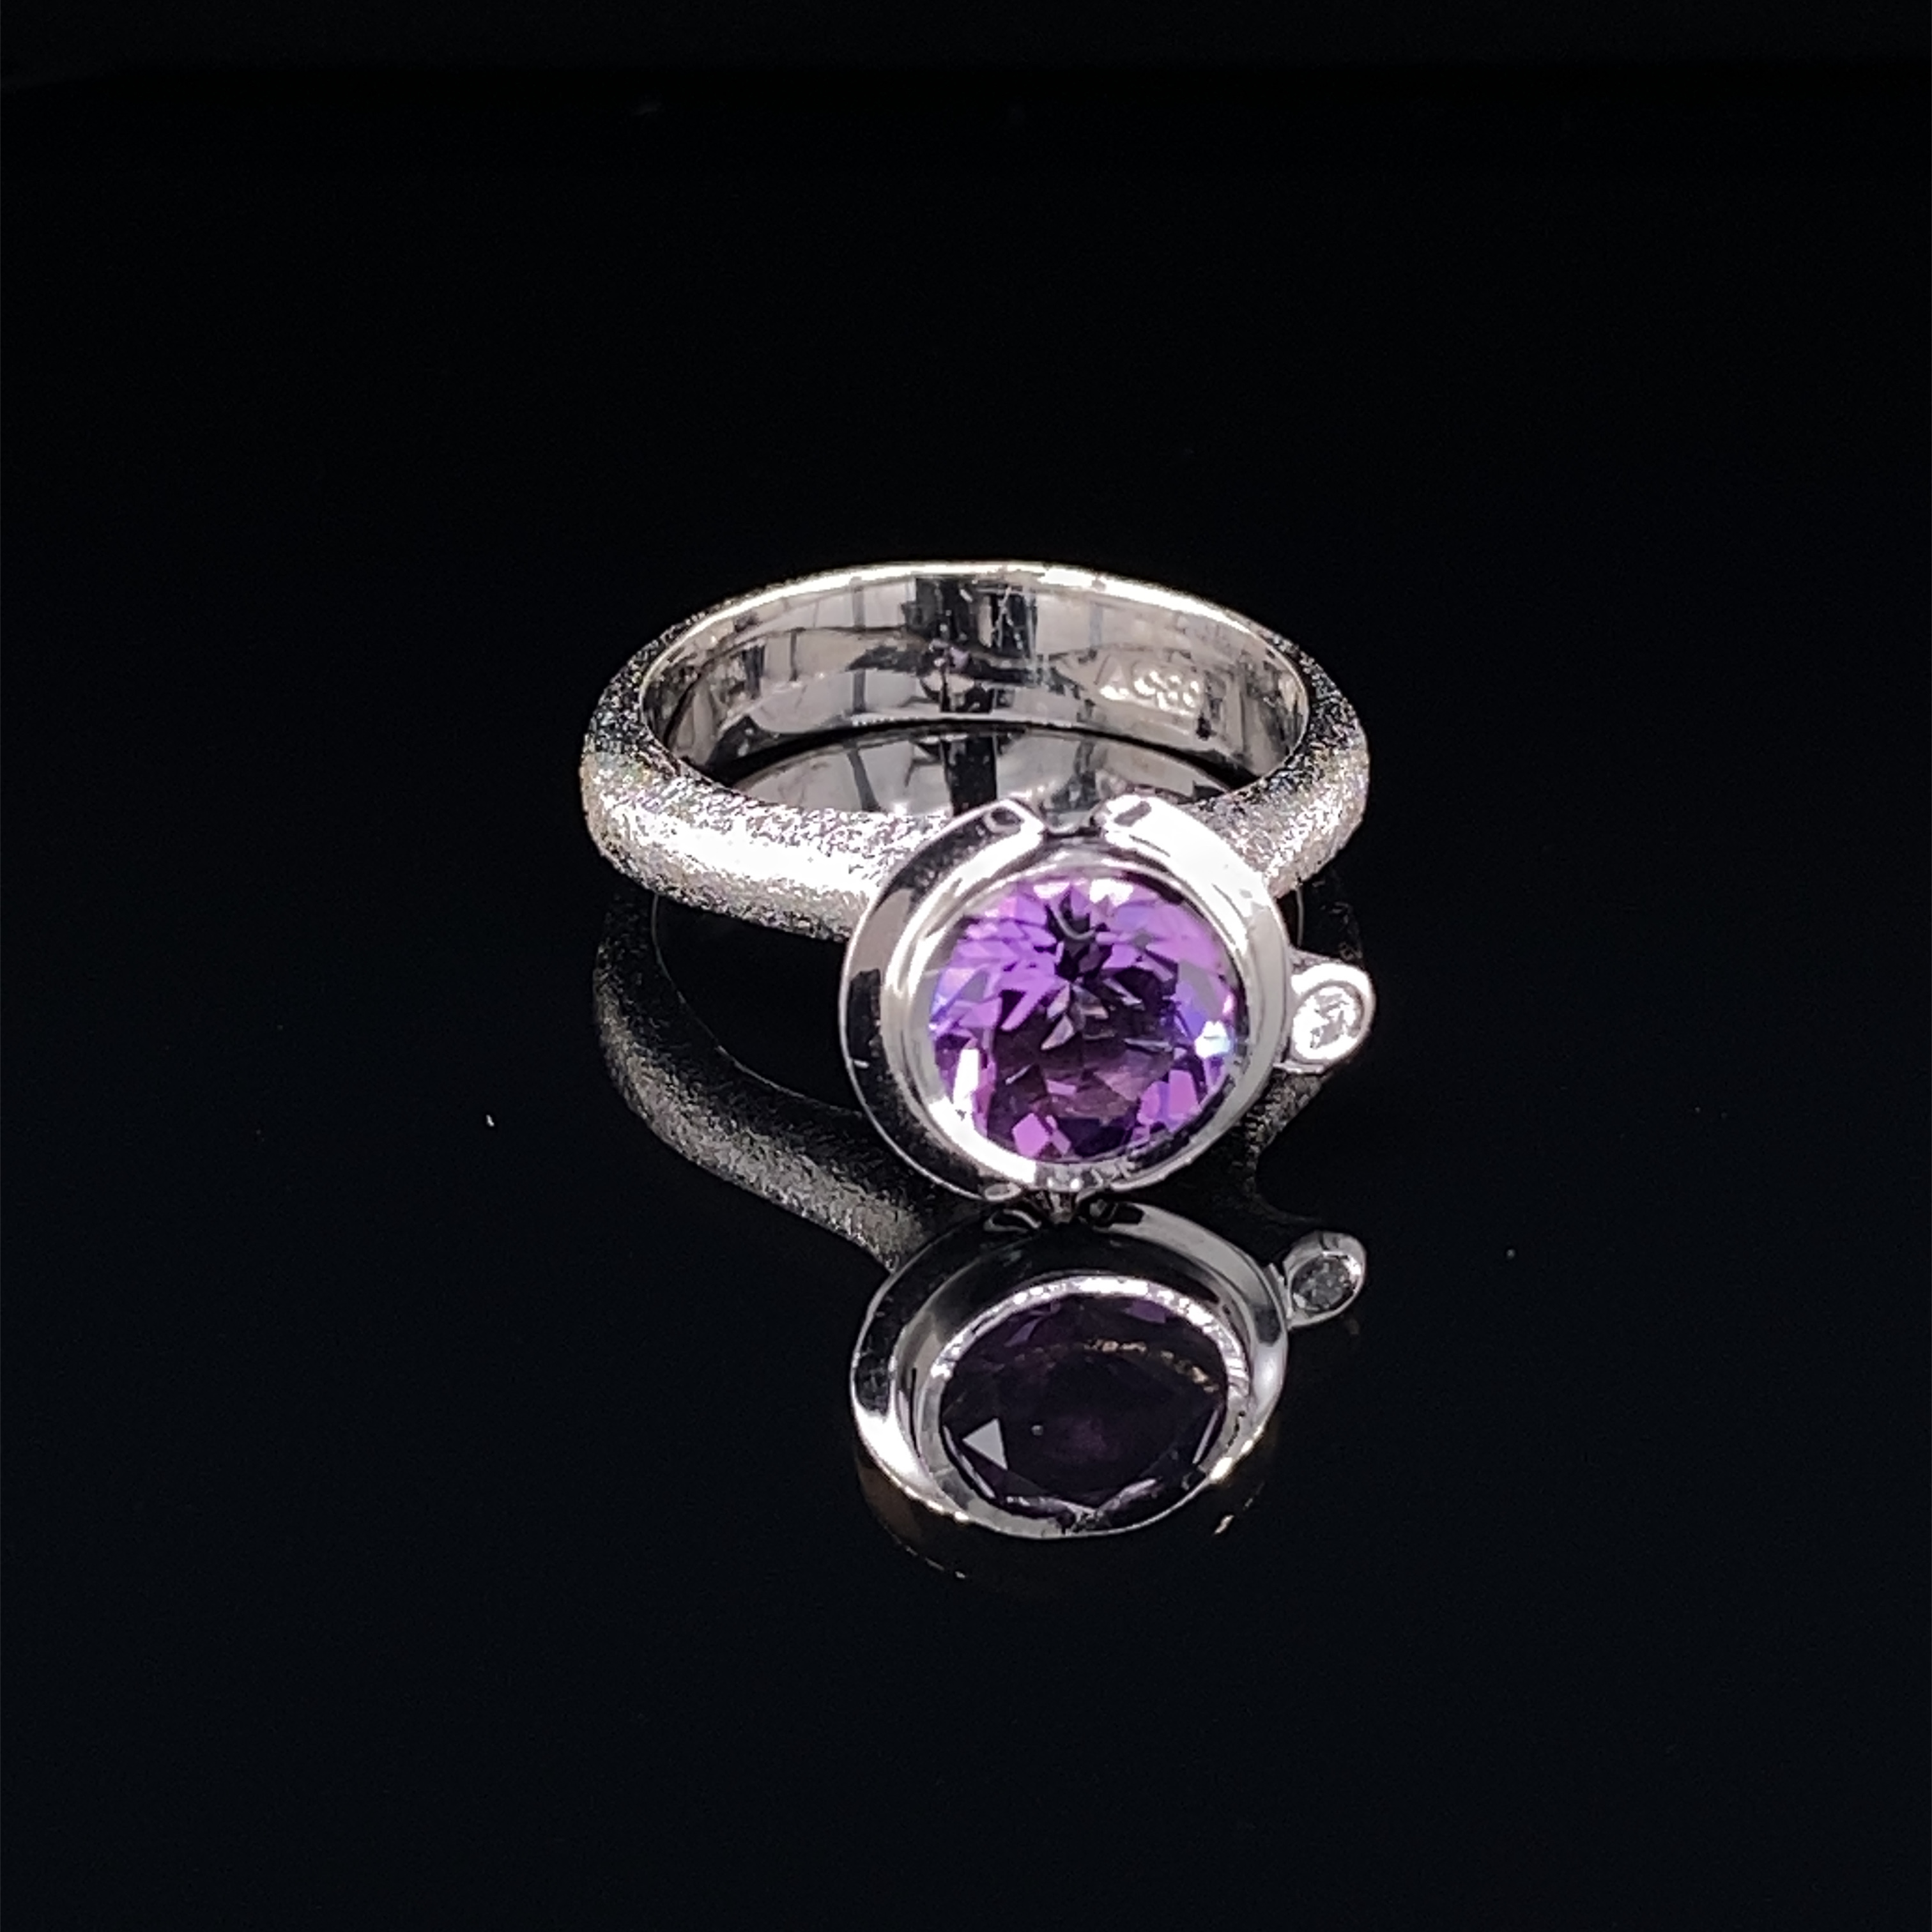 14K white gold ring with amethyst and diamond